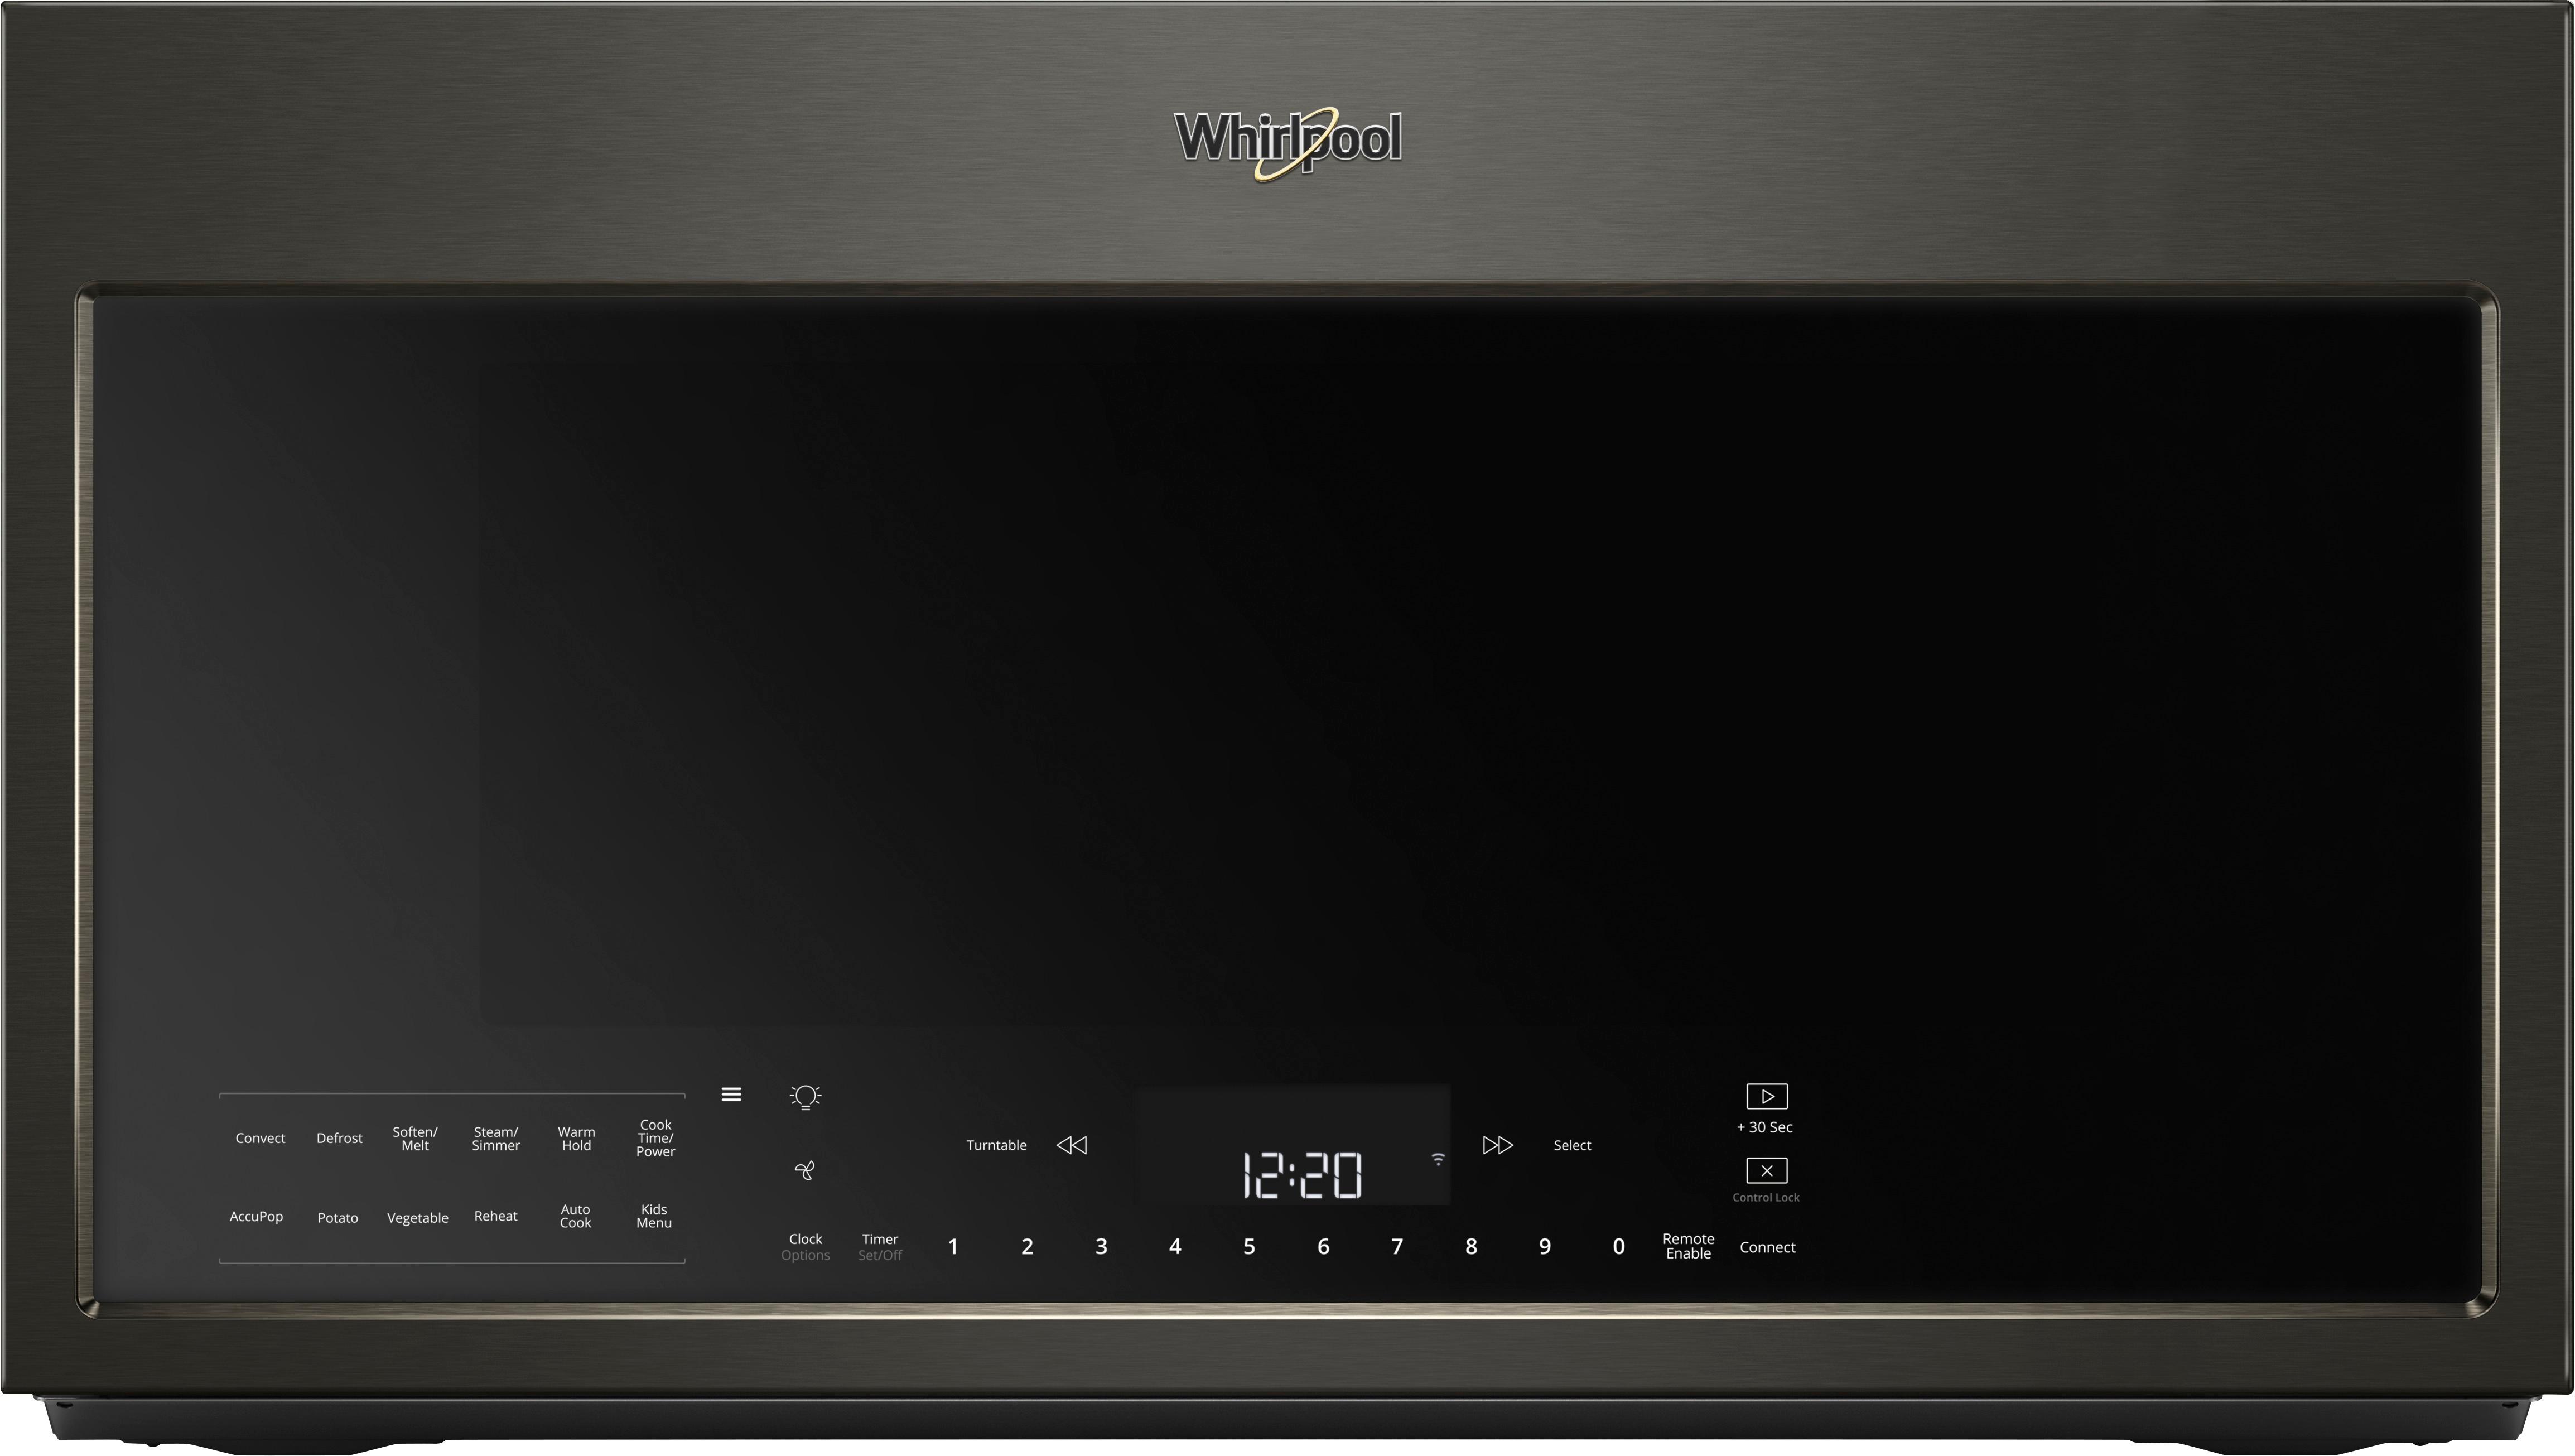 Whirlpool – 1.9 Cu. Ft. Convection Over-the-Range Microwave with Sensor Cooking – Black stainless steel